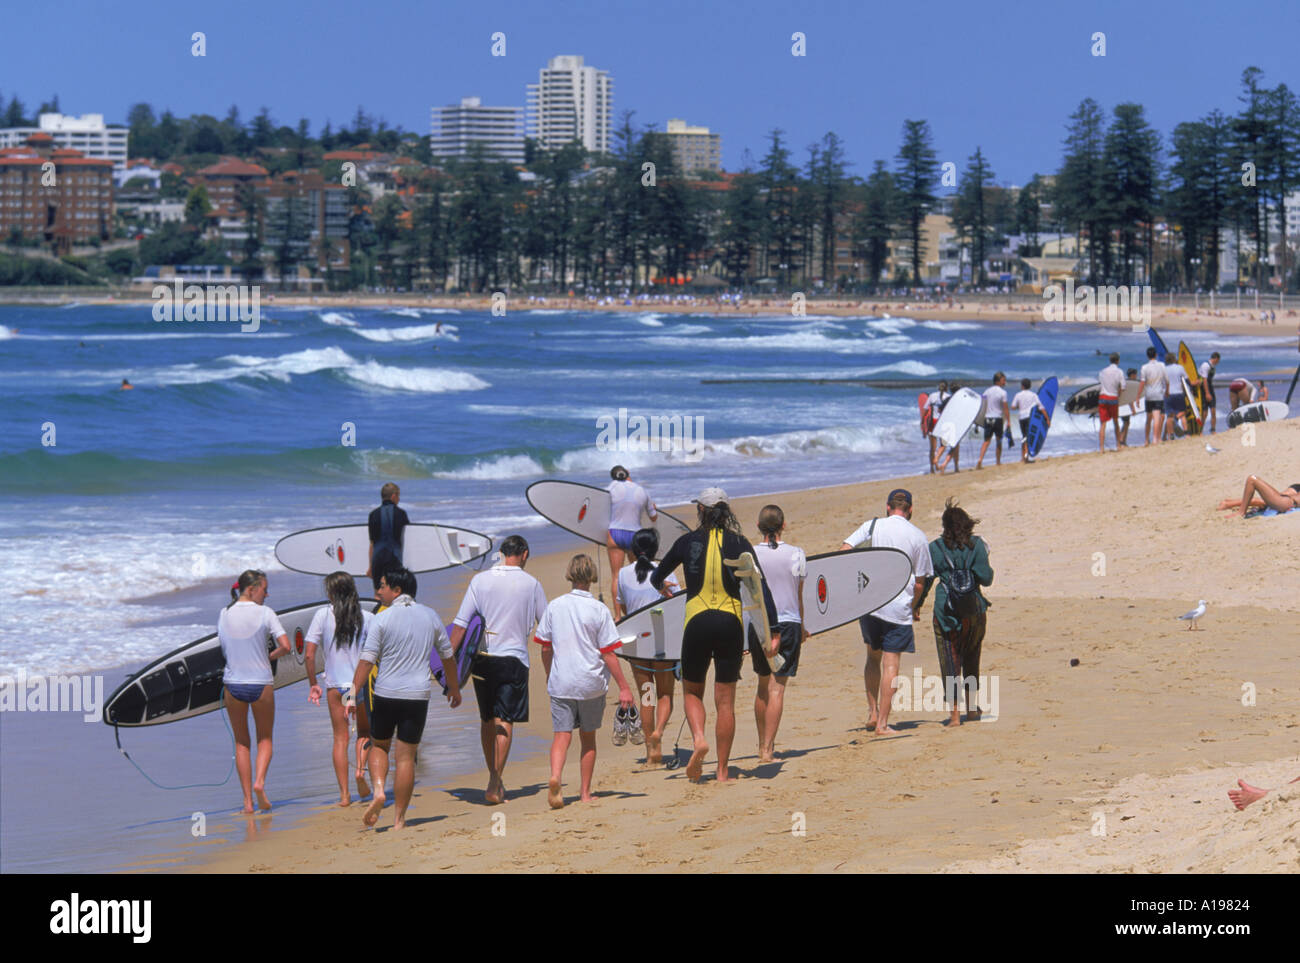 A surf class on Manly beach the northern ocean suburb of Sydney NSW Australia R Francis Stock Photo